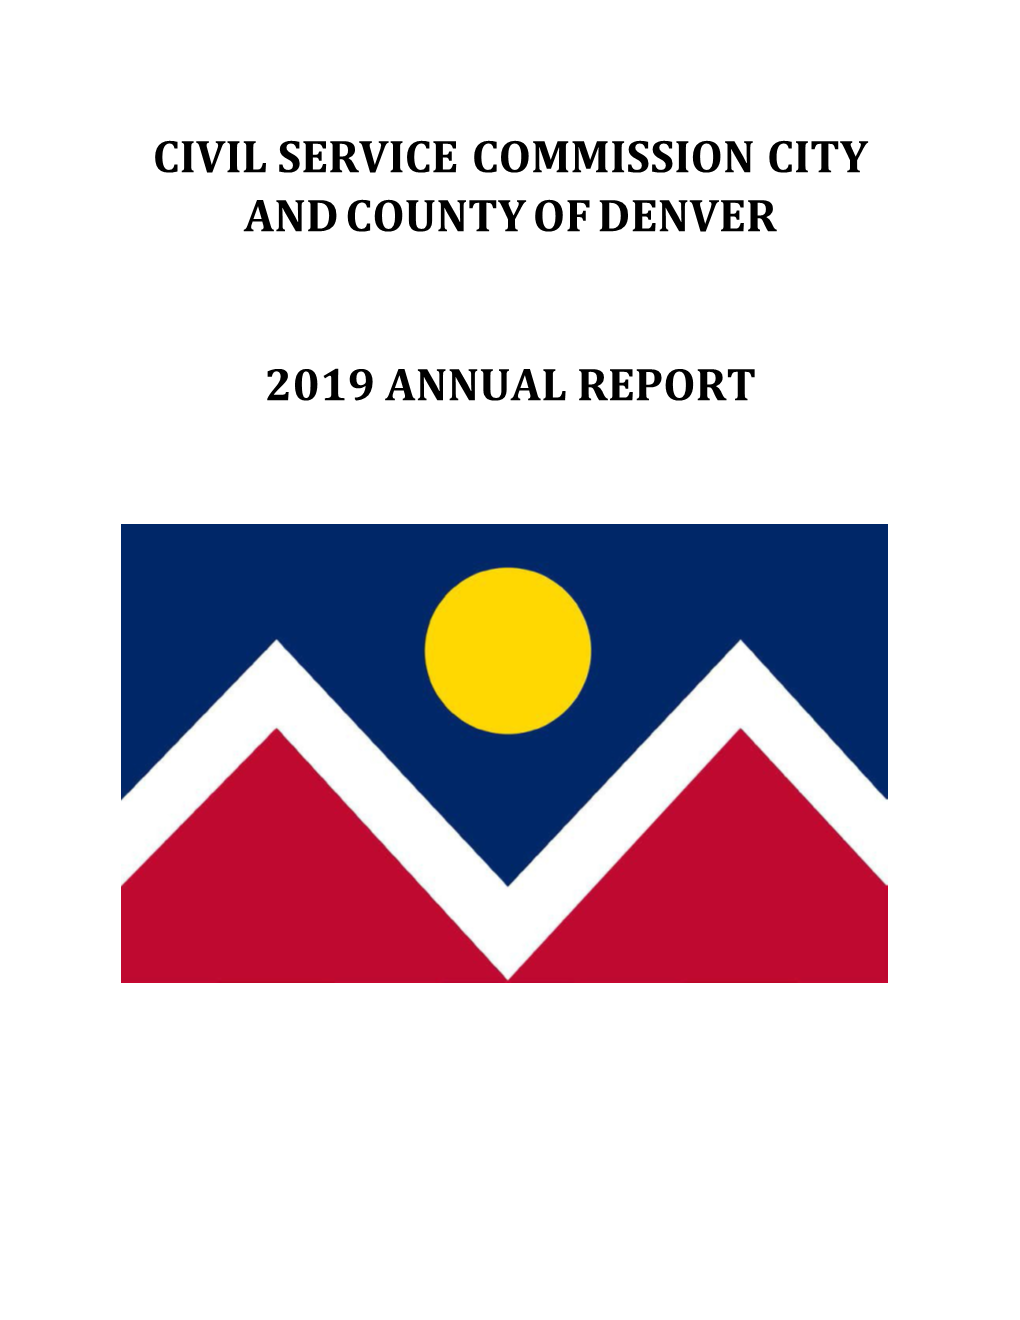 Civil Service Commission City and County of Denver 2019